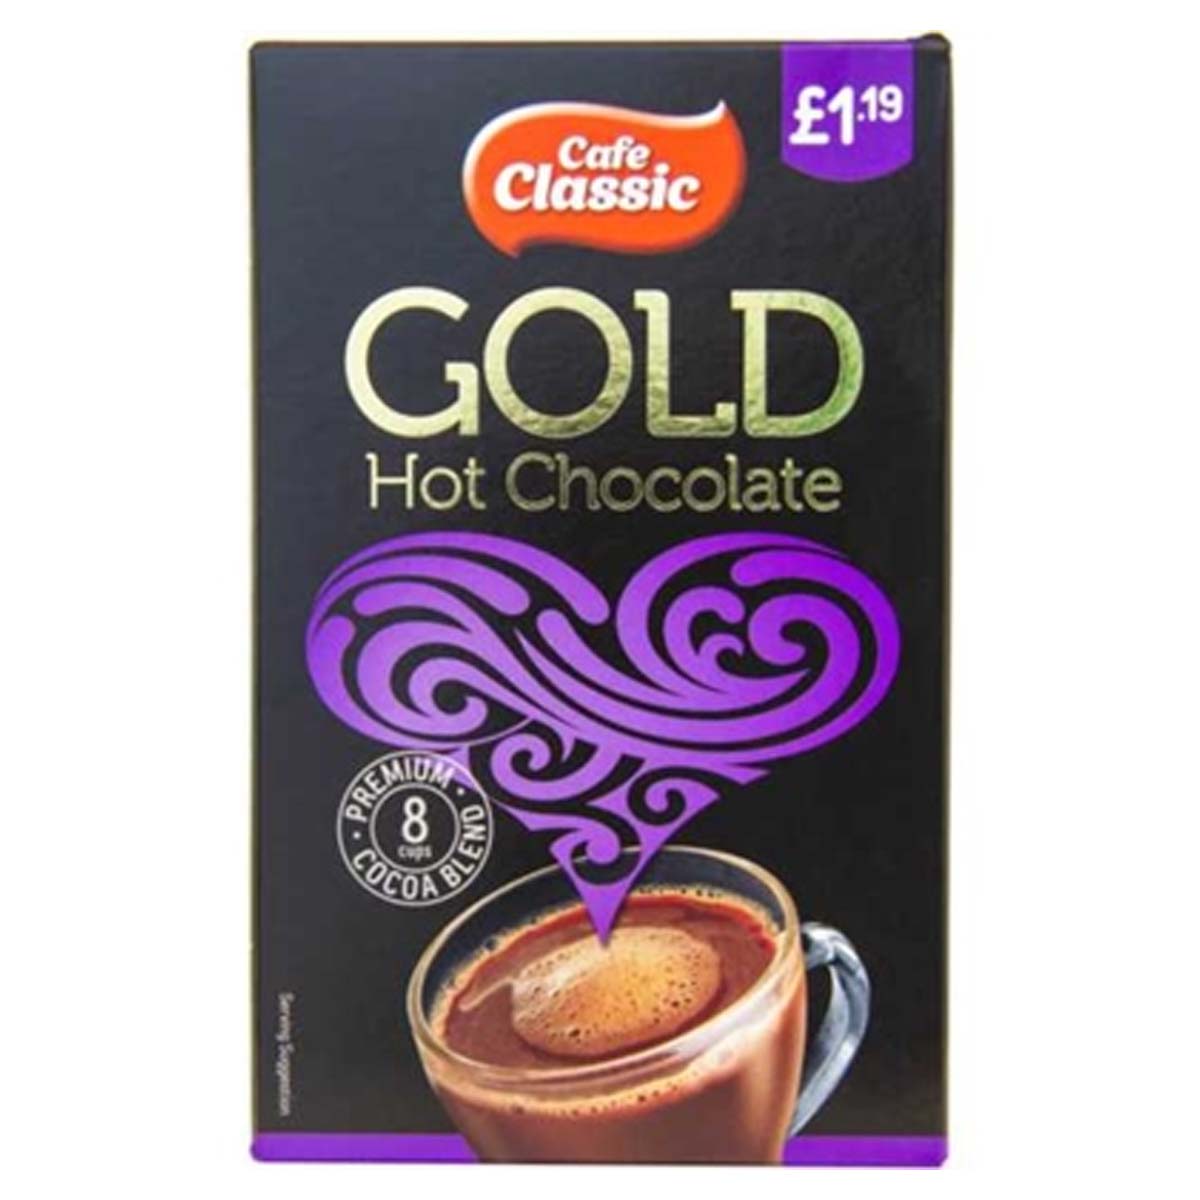 Cafe Classic - Gold Hot Chocolate - 8 x 25g (200g) - Continental Food Store